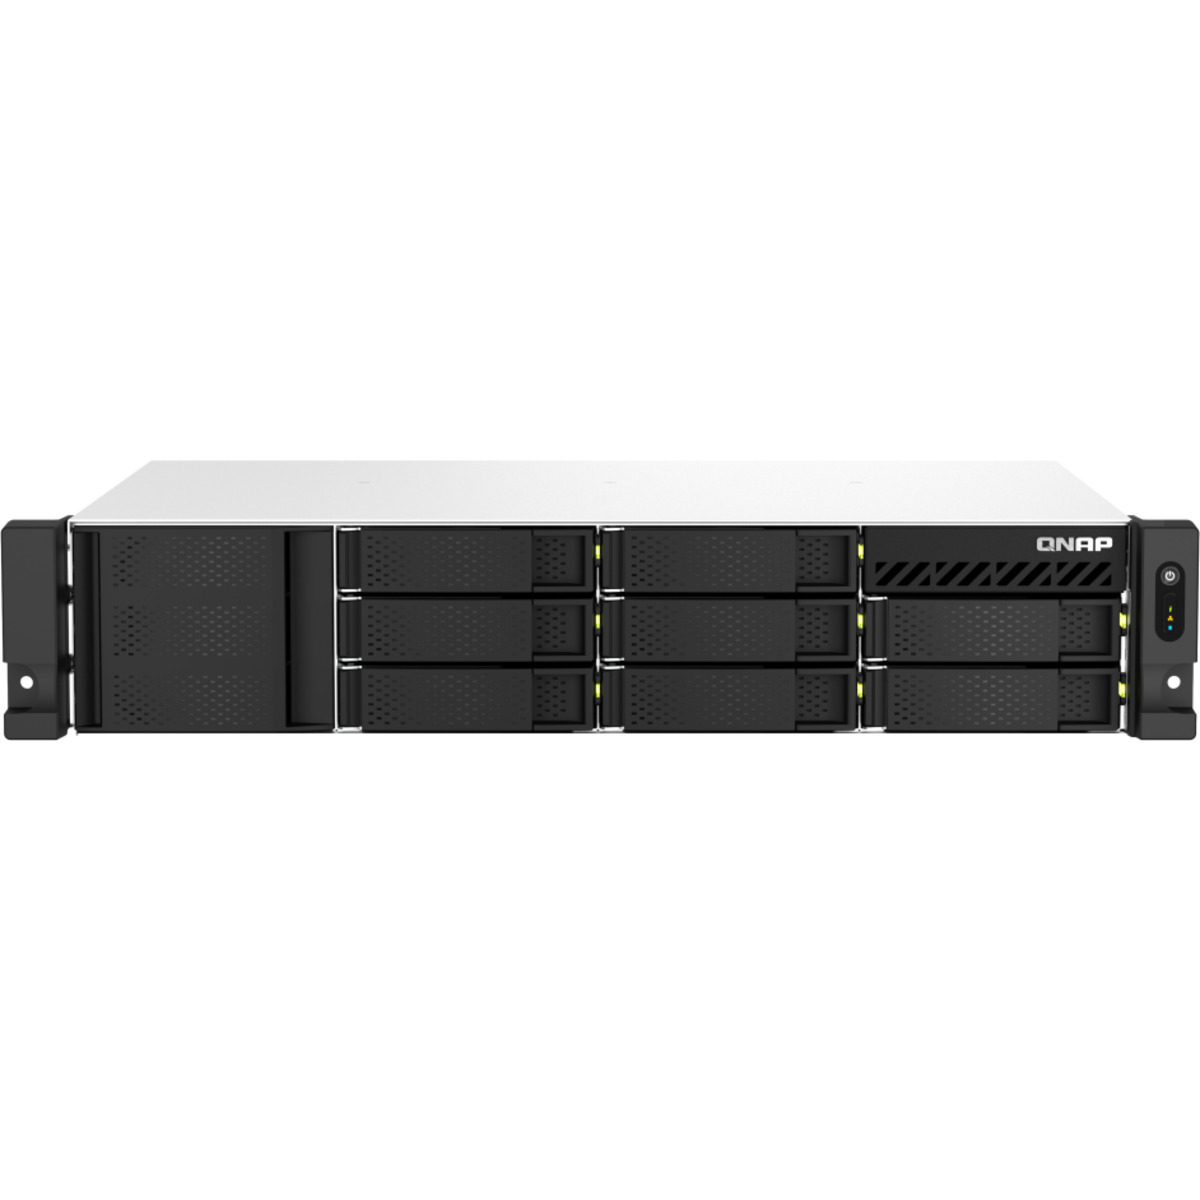 QNAP TS-873AeU-RP 24tb 8-Bay RackMount Multimedia / Power User / Business NAS - Network Attached Storage Device 4x6tb Western Digital Gold WD6003FRYZ 3.5 7200rpm SATA 6Gb/s HDD ENTERPRISE Class Drives Installed - Burn-In Tested - FREE RAM UPGRADE TS-873AeU-RP